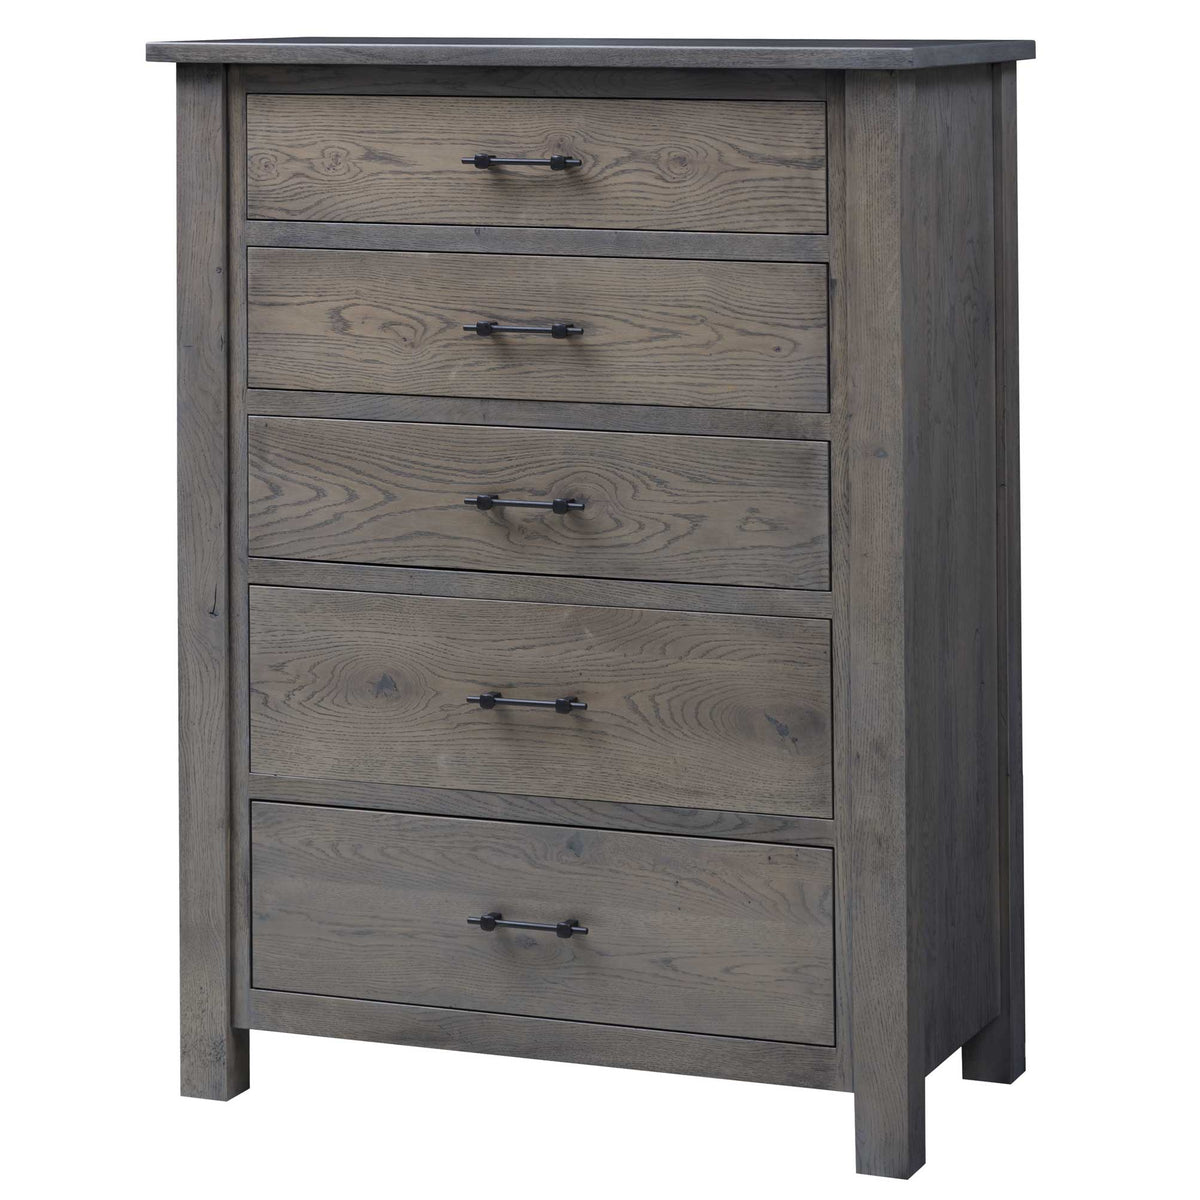 Amish Heirloom Mission Chest Of Drawers - snyders.furniture